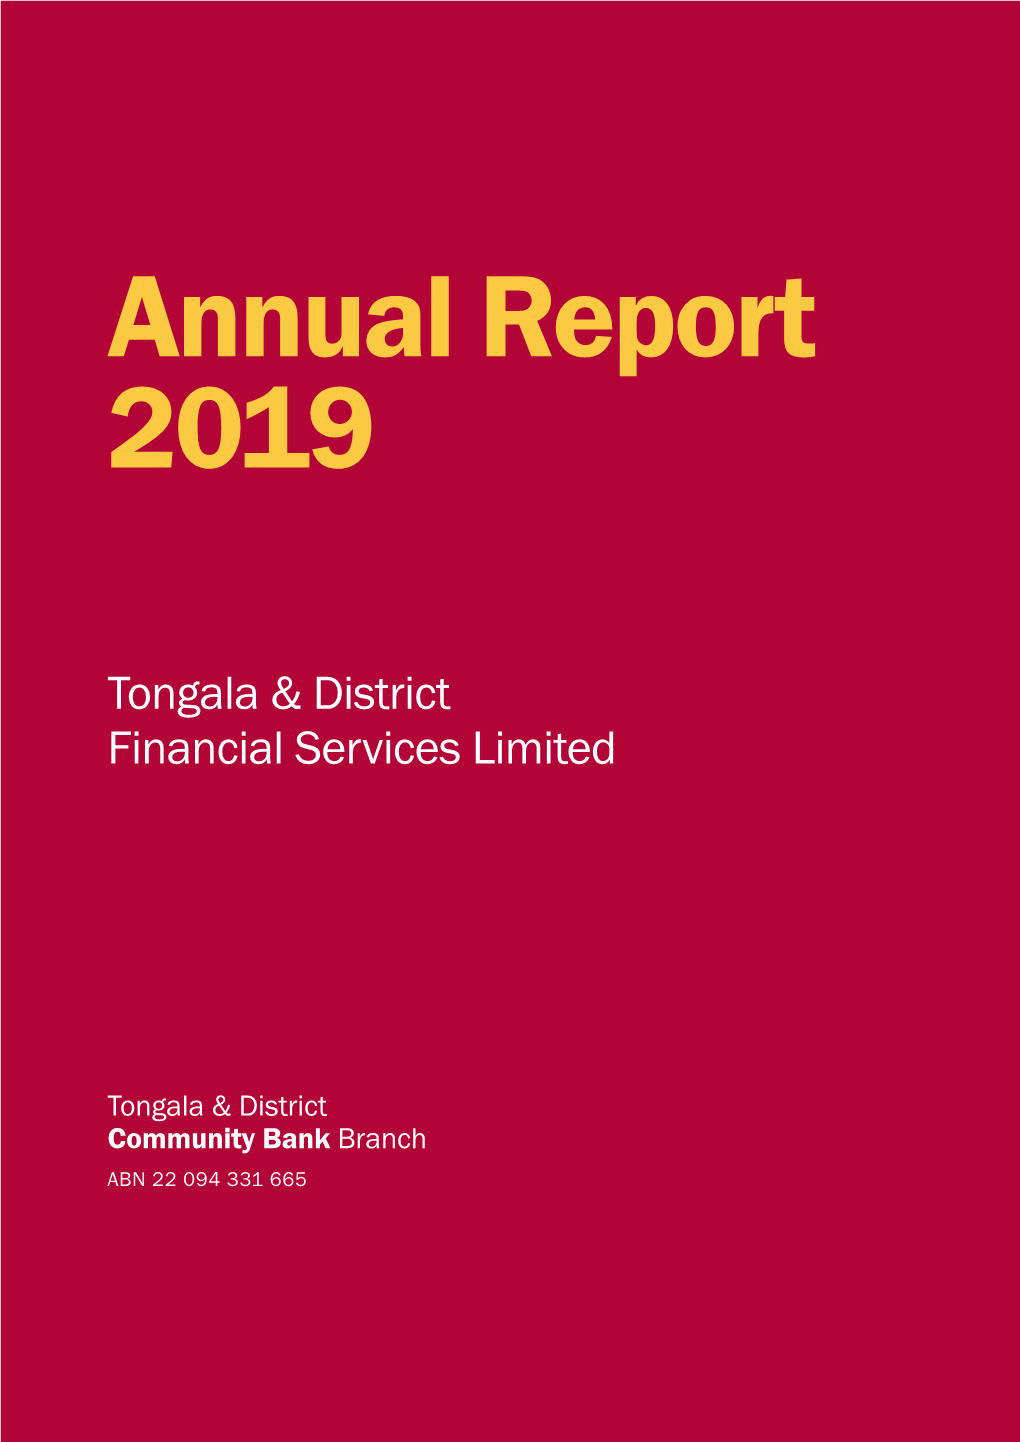 Tongala & District Financial Services Limited